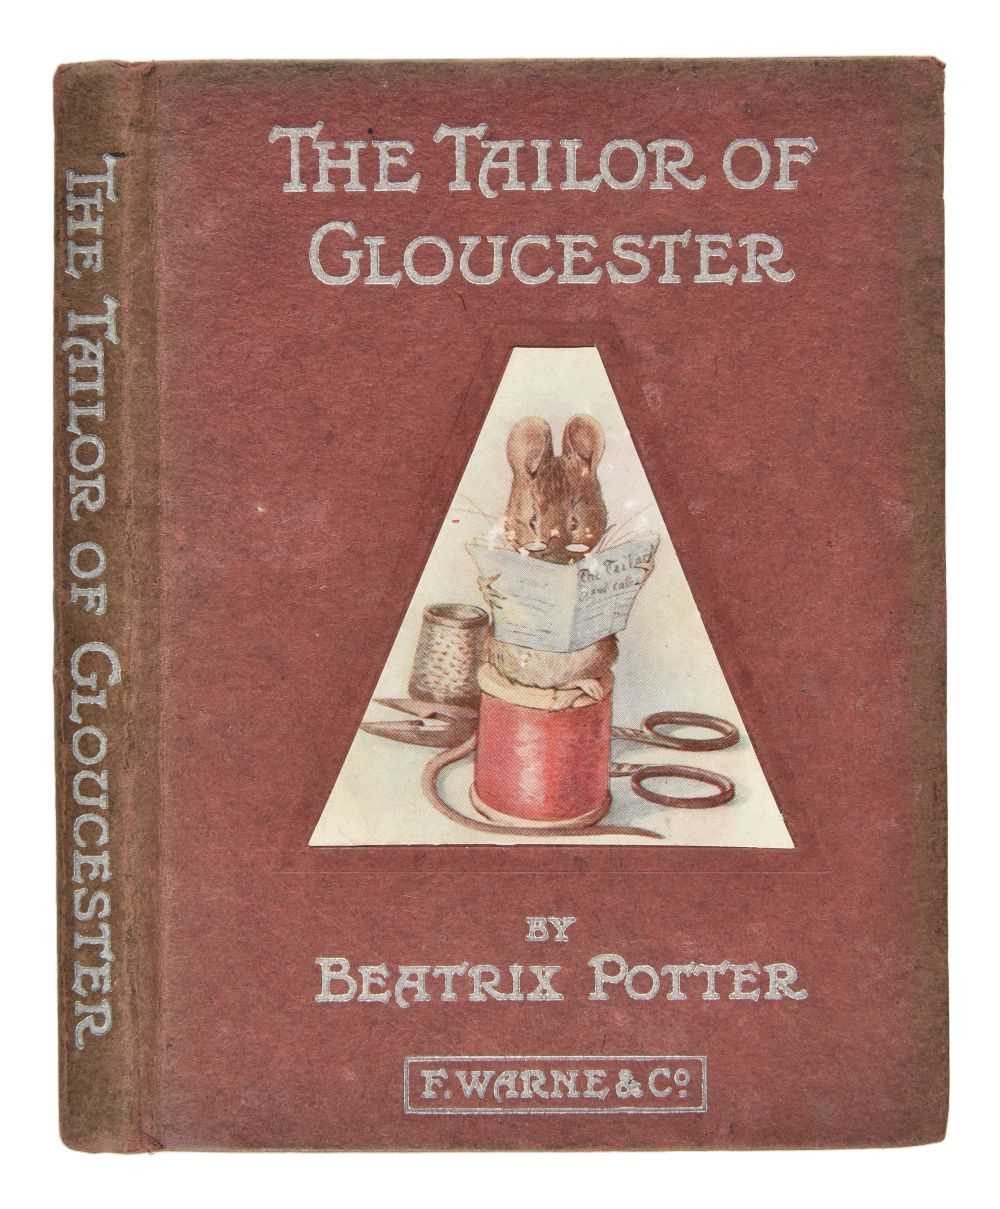 Lot 578 - Potter (Beatrix). The Tailor of Gloucester, 1st edition, 1st issue, 1903